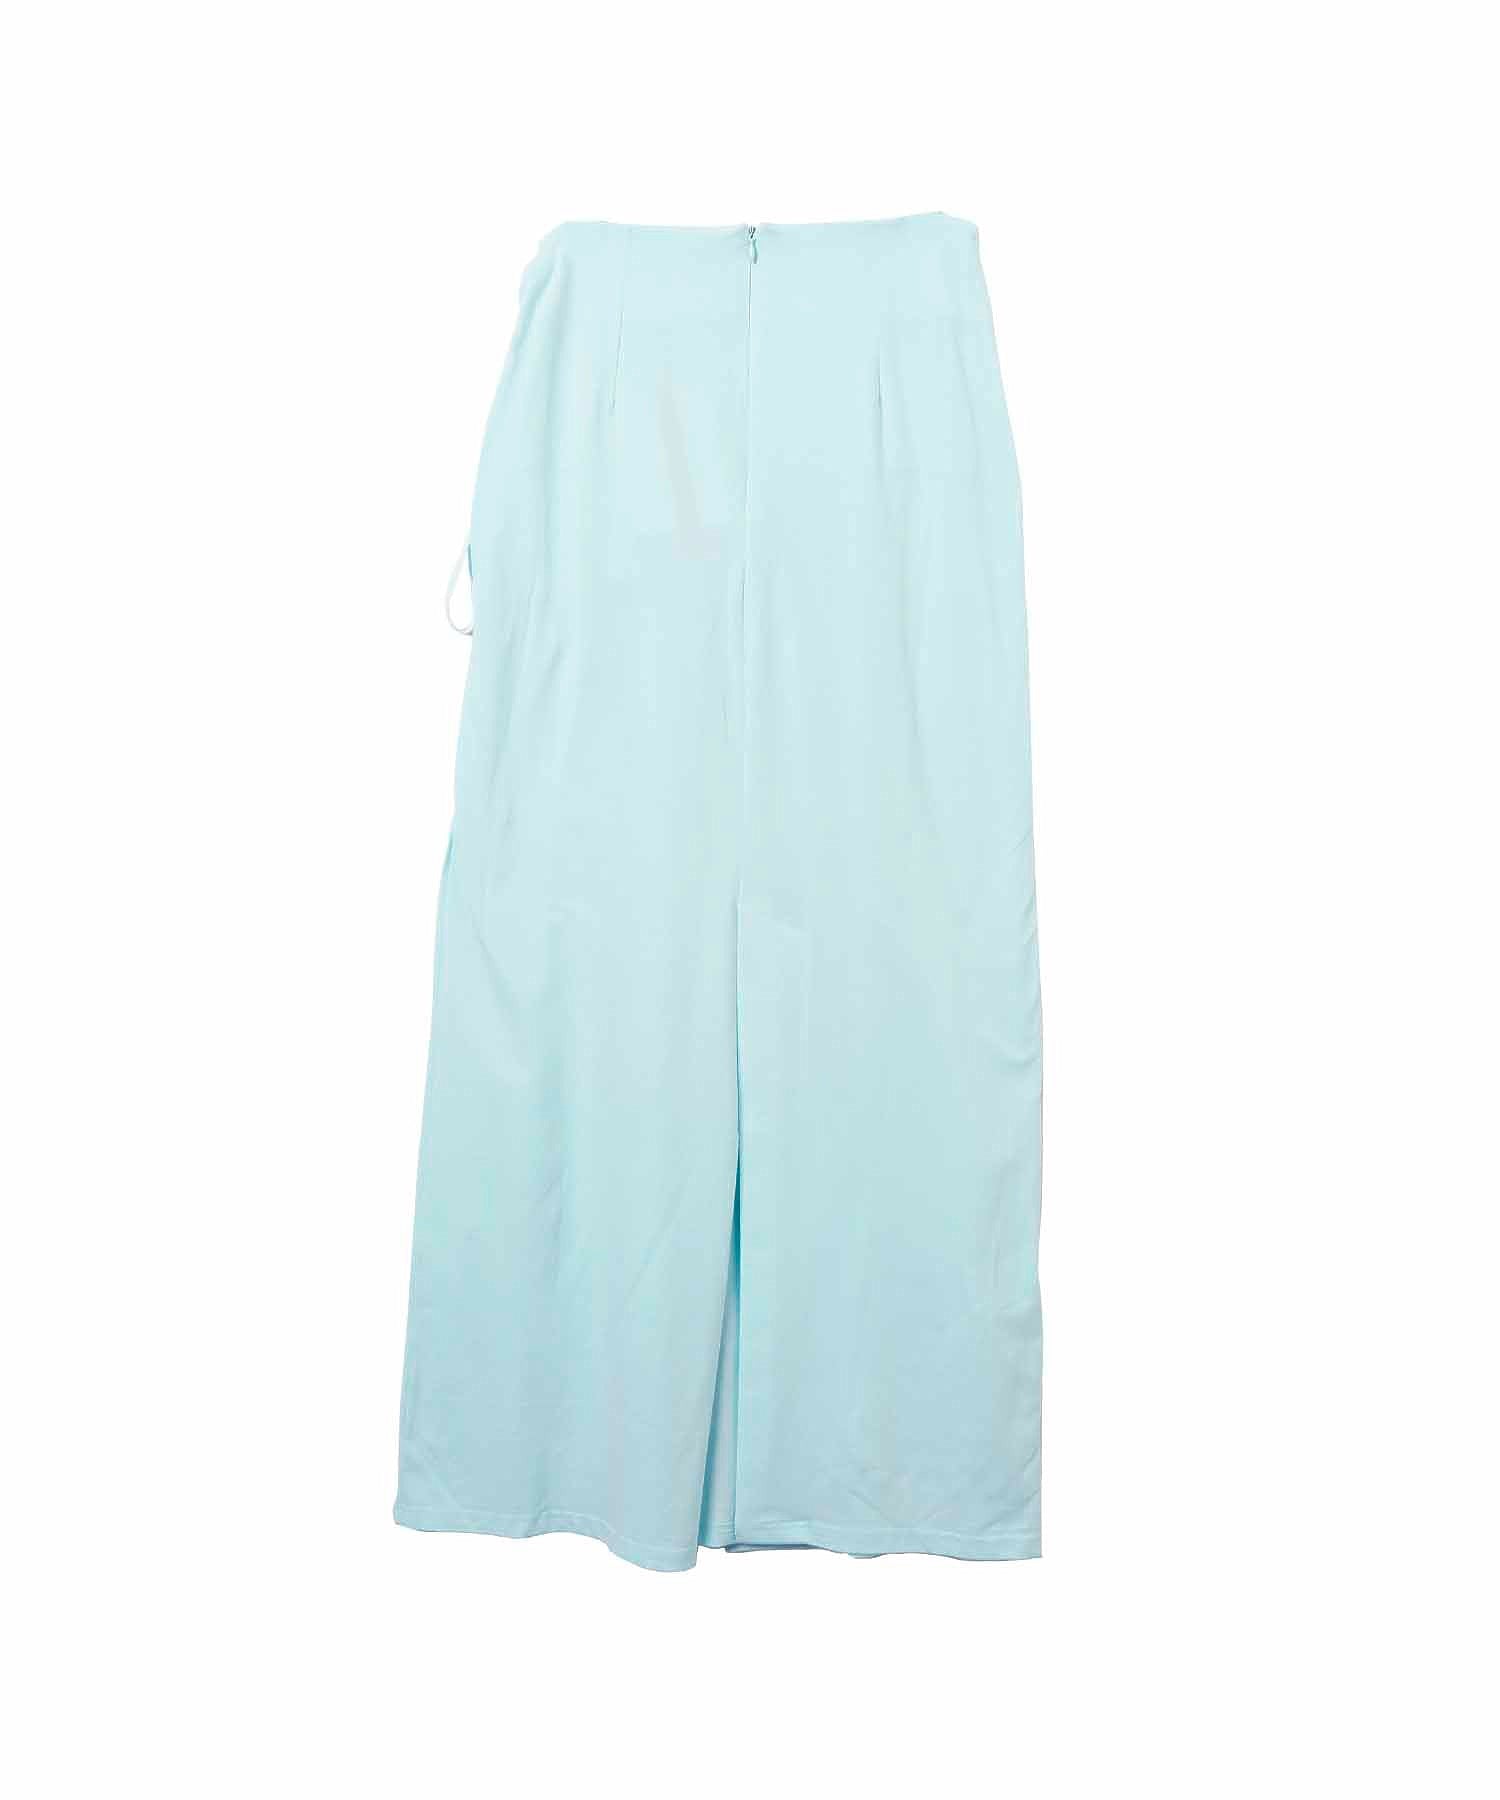 THE OPEN PRODUCT /ザオープンプロダクト/ RUCHED WRAP MAXI SKIRT GTO221SK002